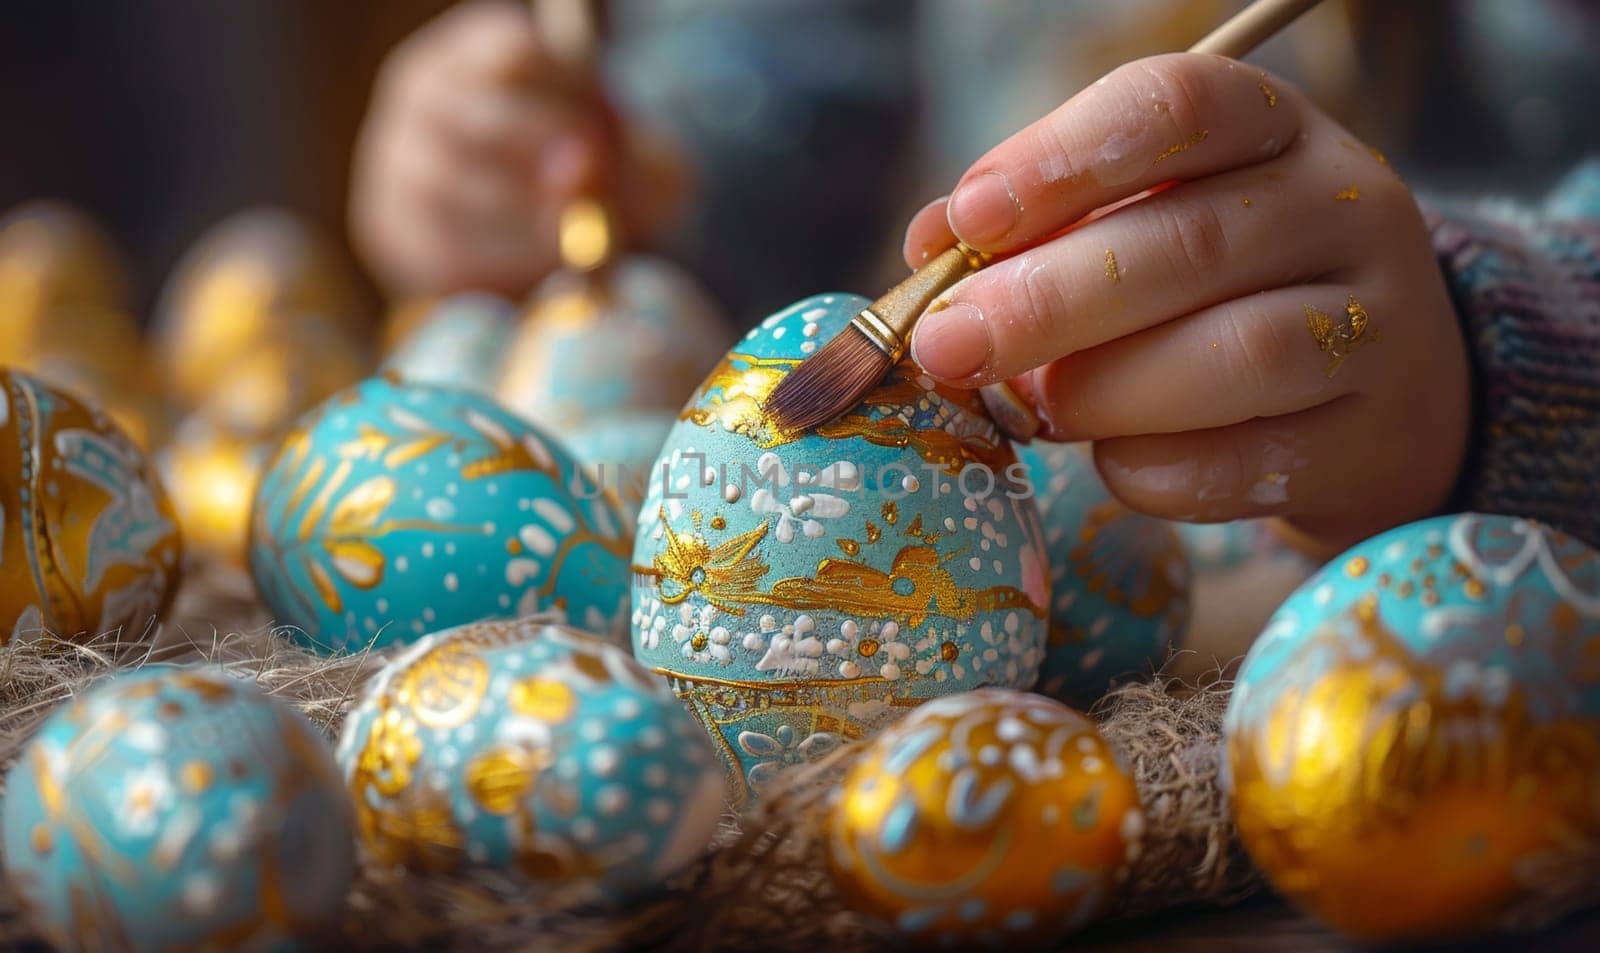 A child is painting eggs with gold and blue paint by nateemee